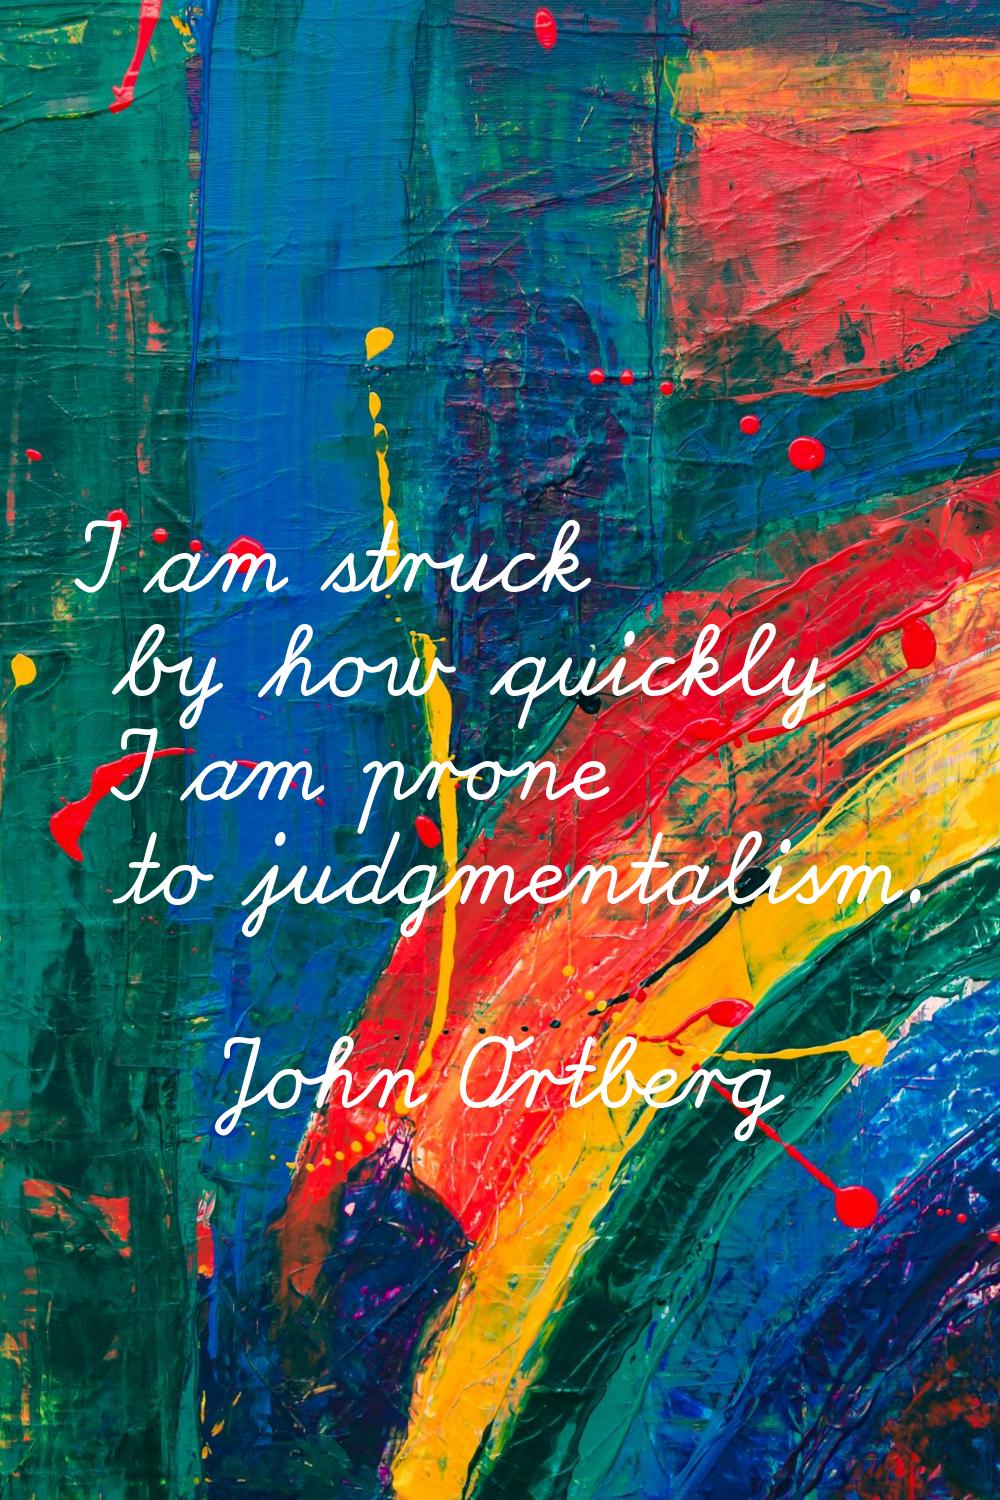 I am struck by how quickly I am prone to judgmentalism.